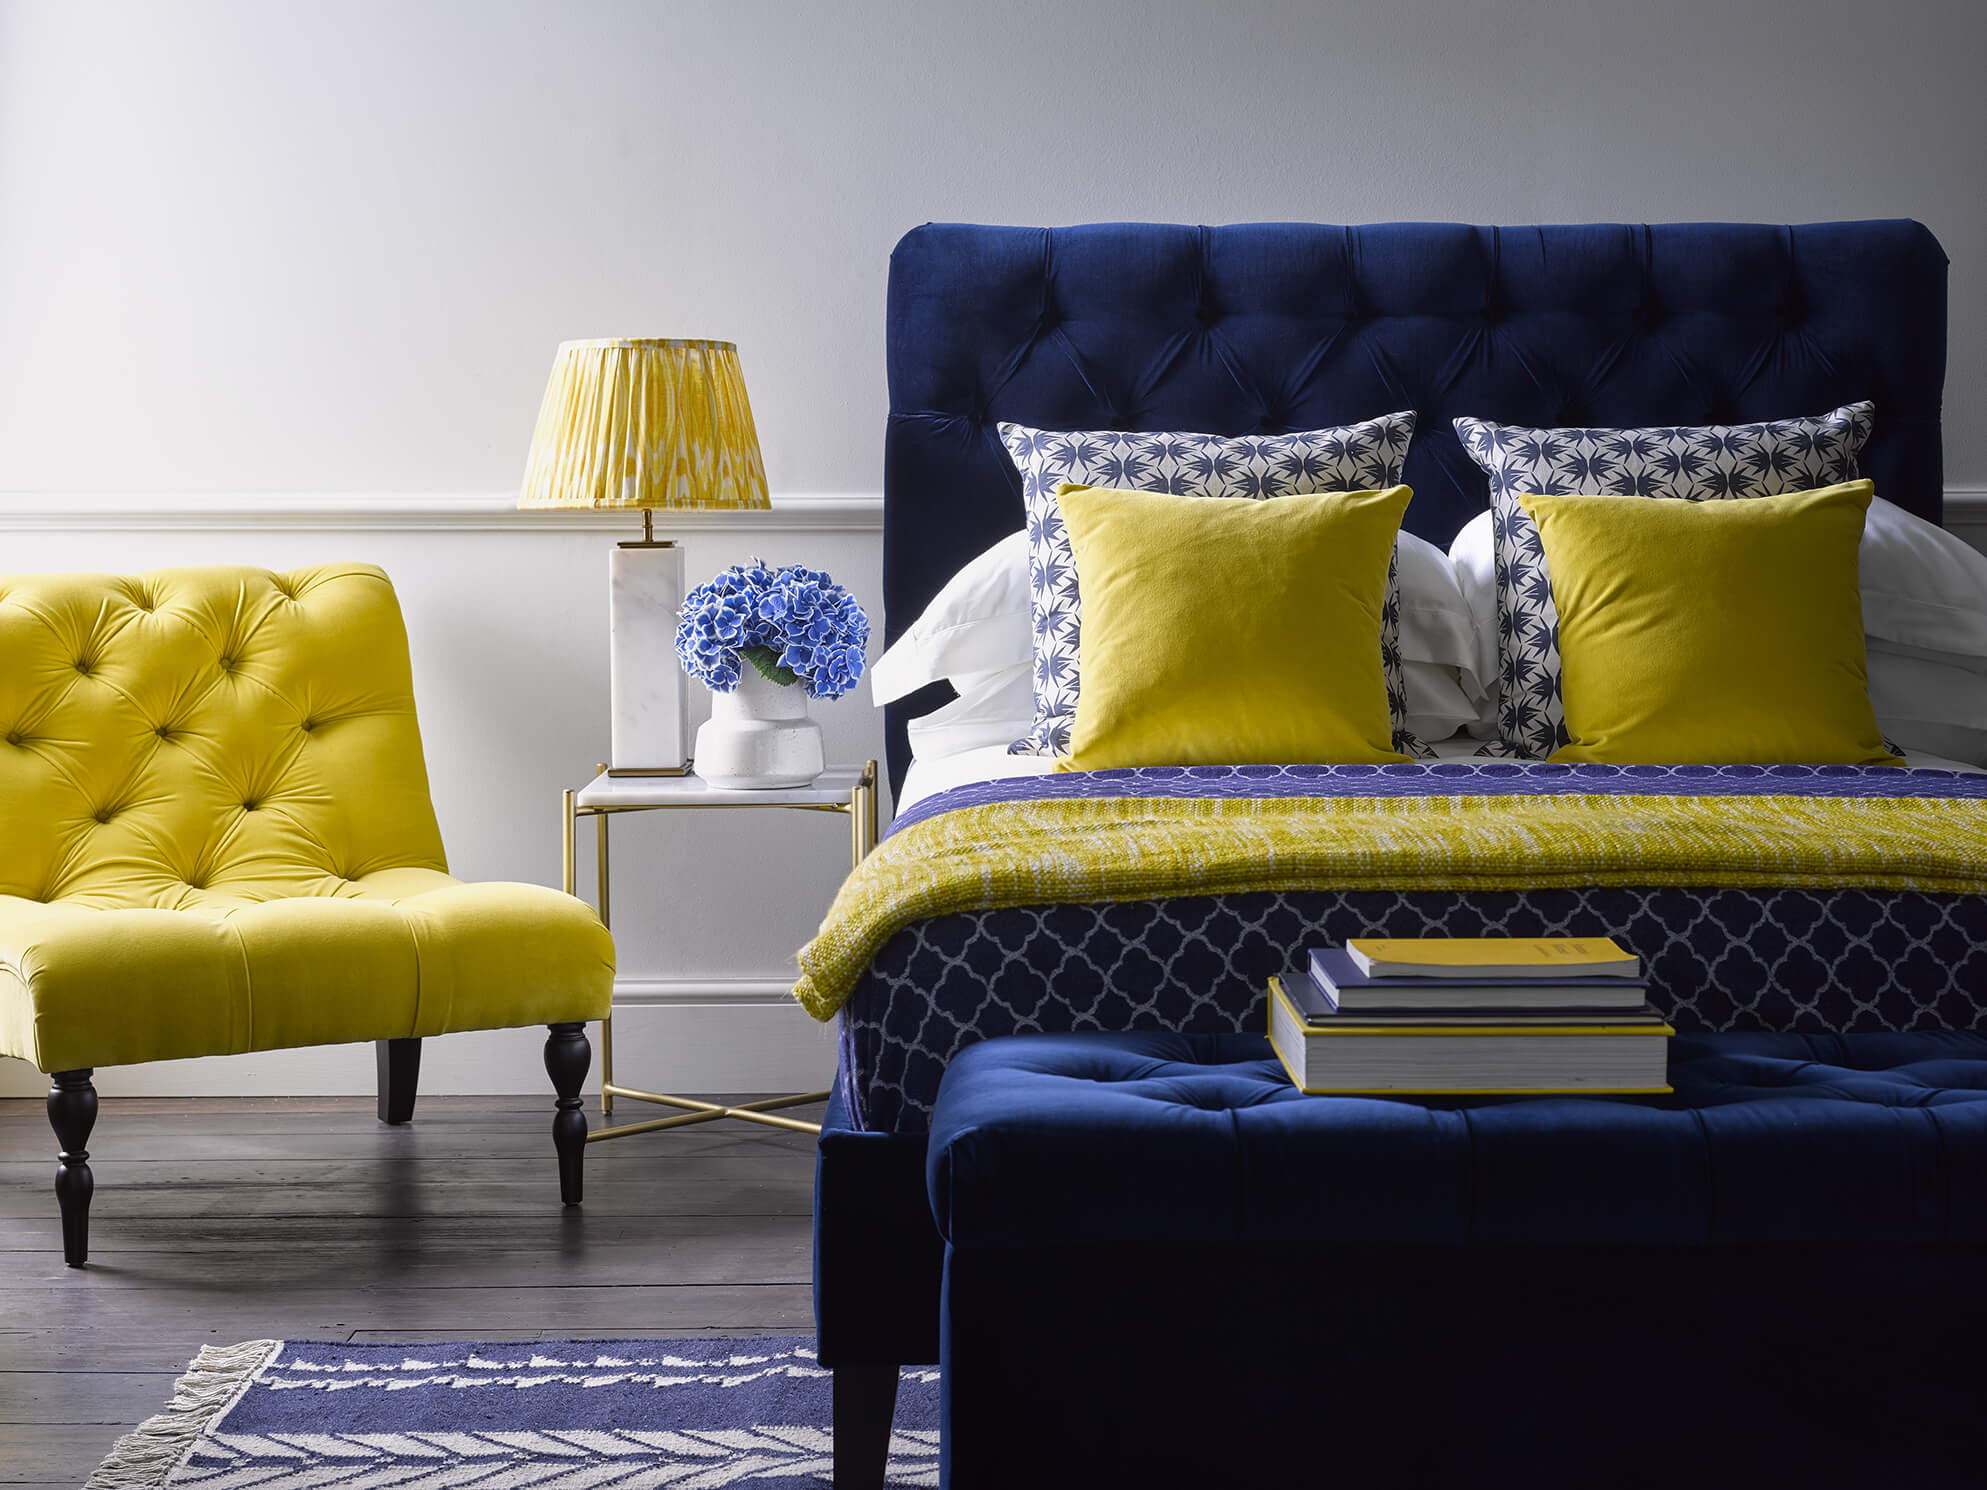 Beat Blue Monday with these 5 stunning blue interiors - website astiazh